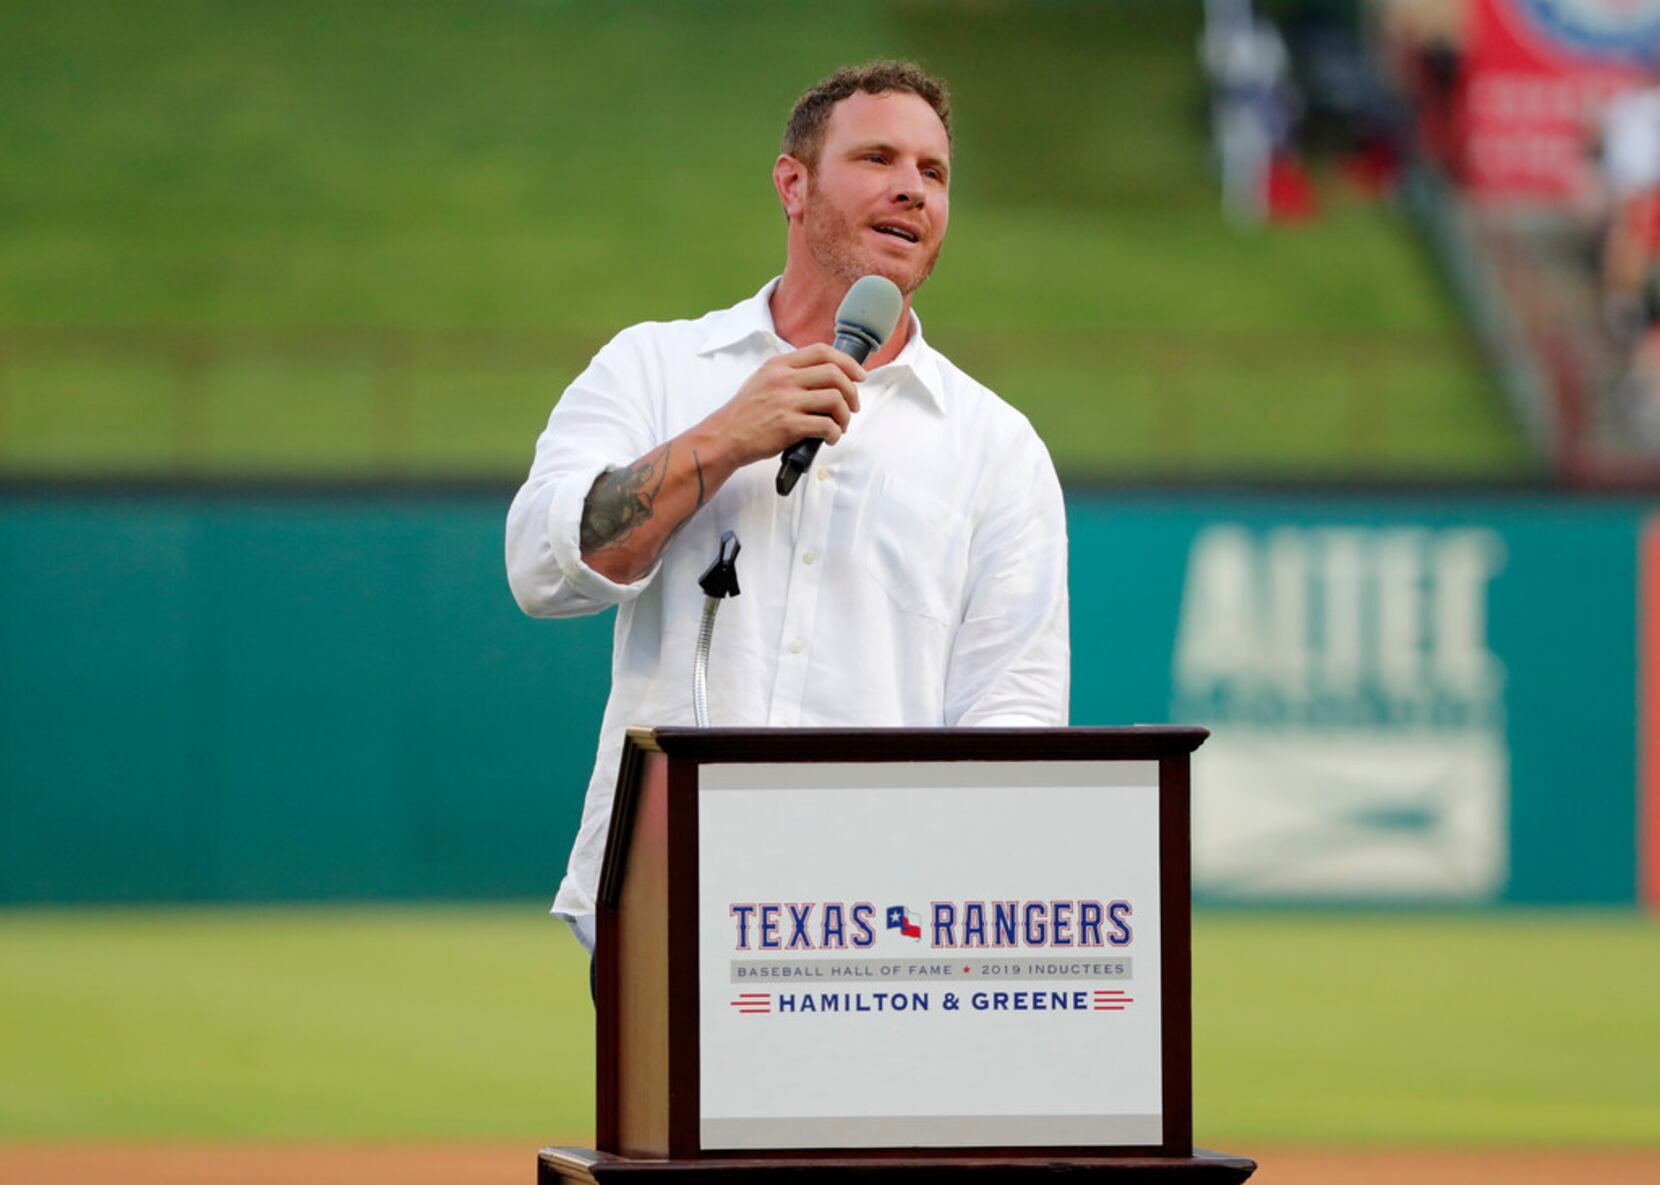 Josh Hamilton's Ex-Wife & Kids: 5 Fast Facts You Need to Know